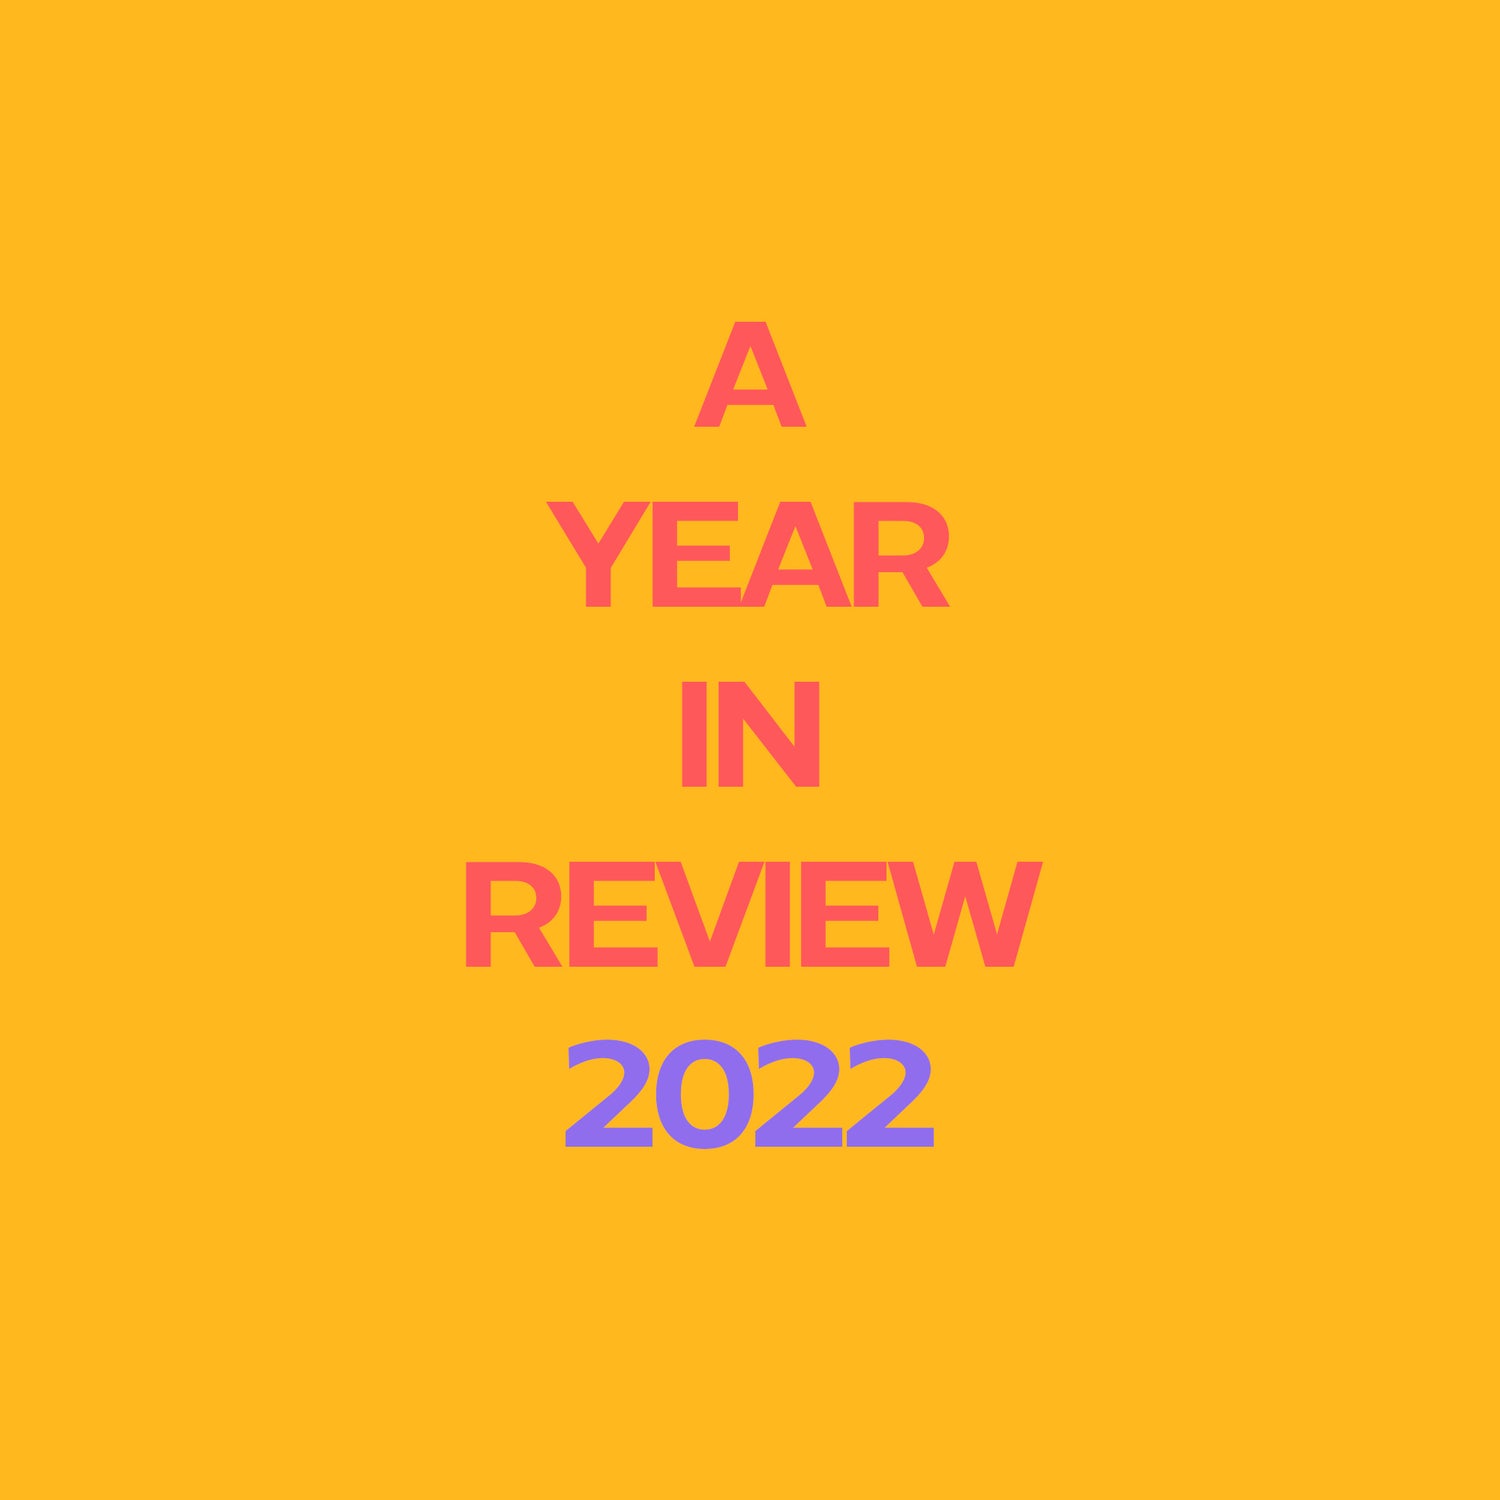 Voices of Hope A Year In Review 2022